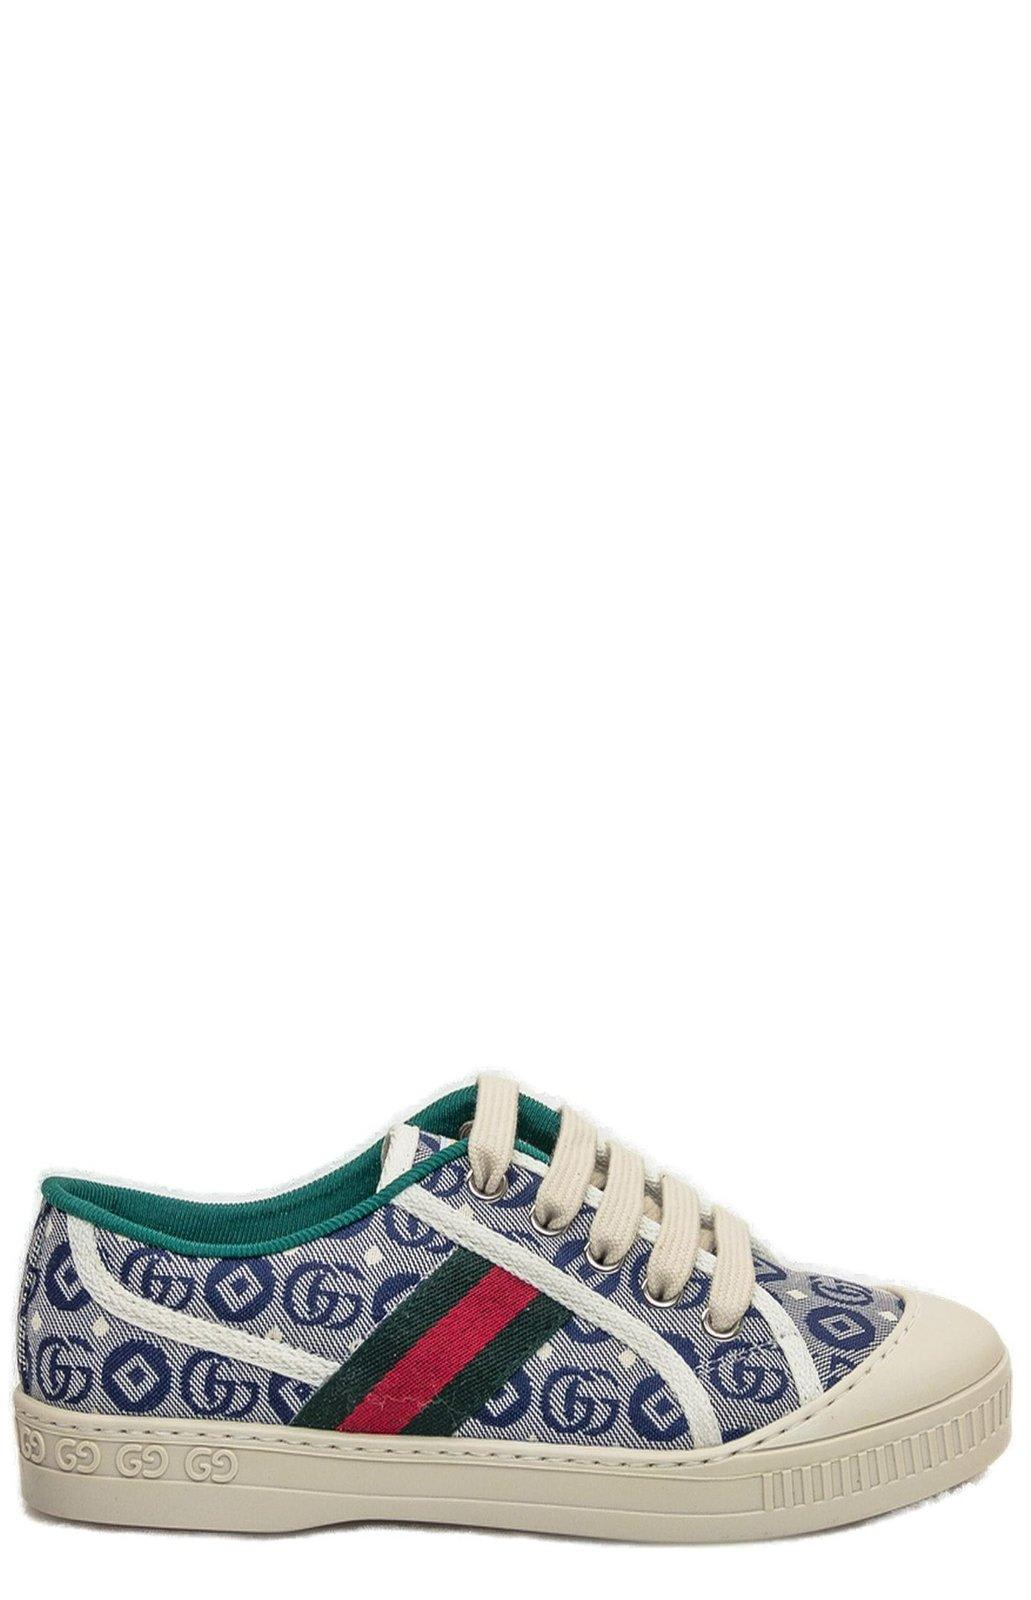 Gucci 1977 Tennis Allover Logo Printed Sneakers